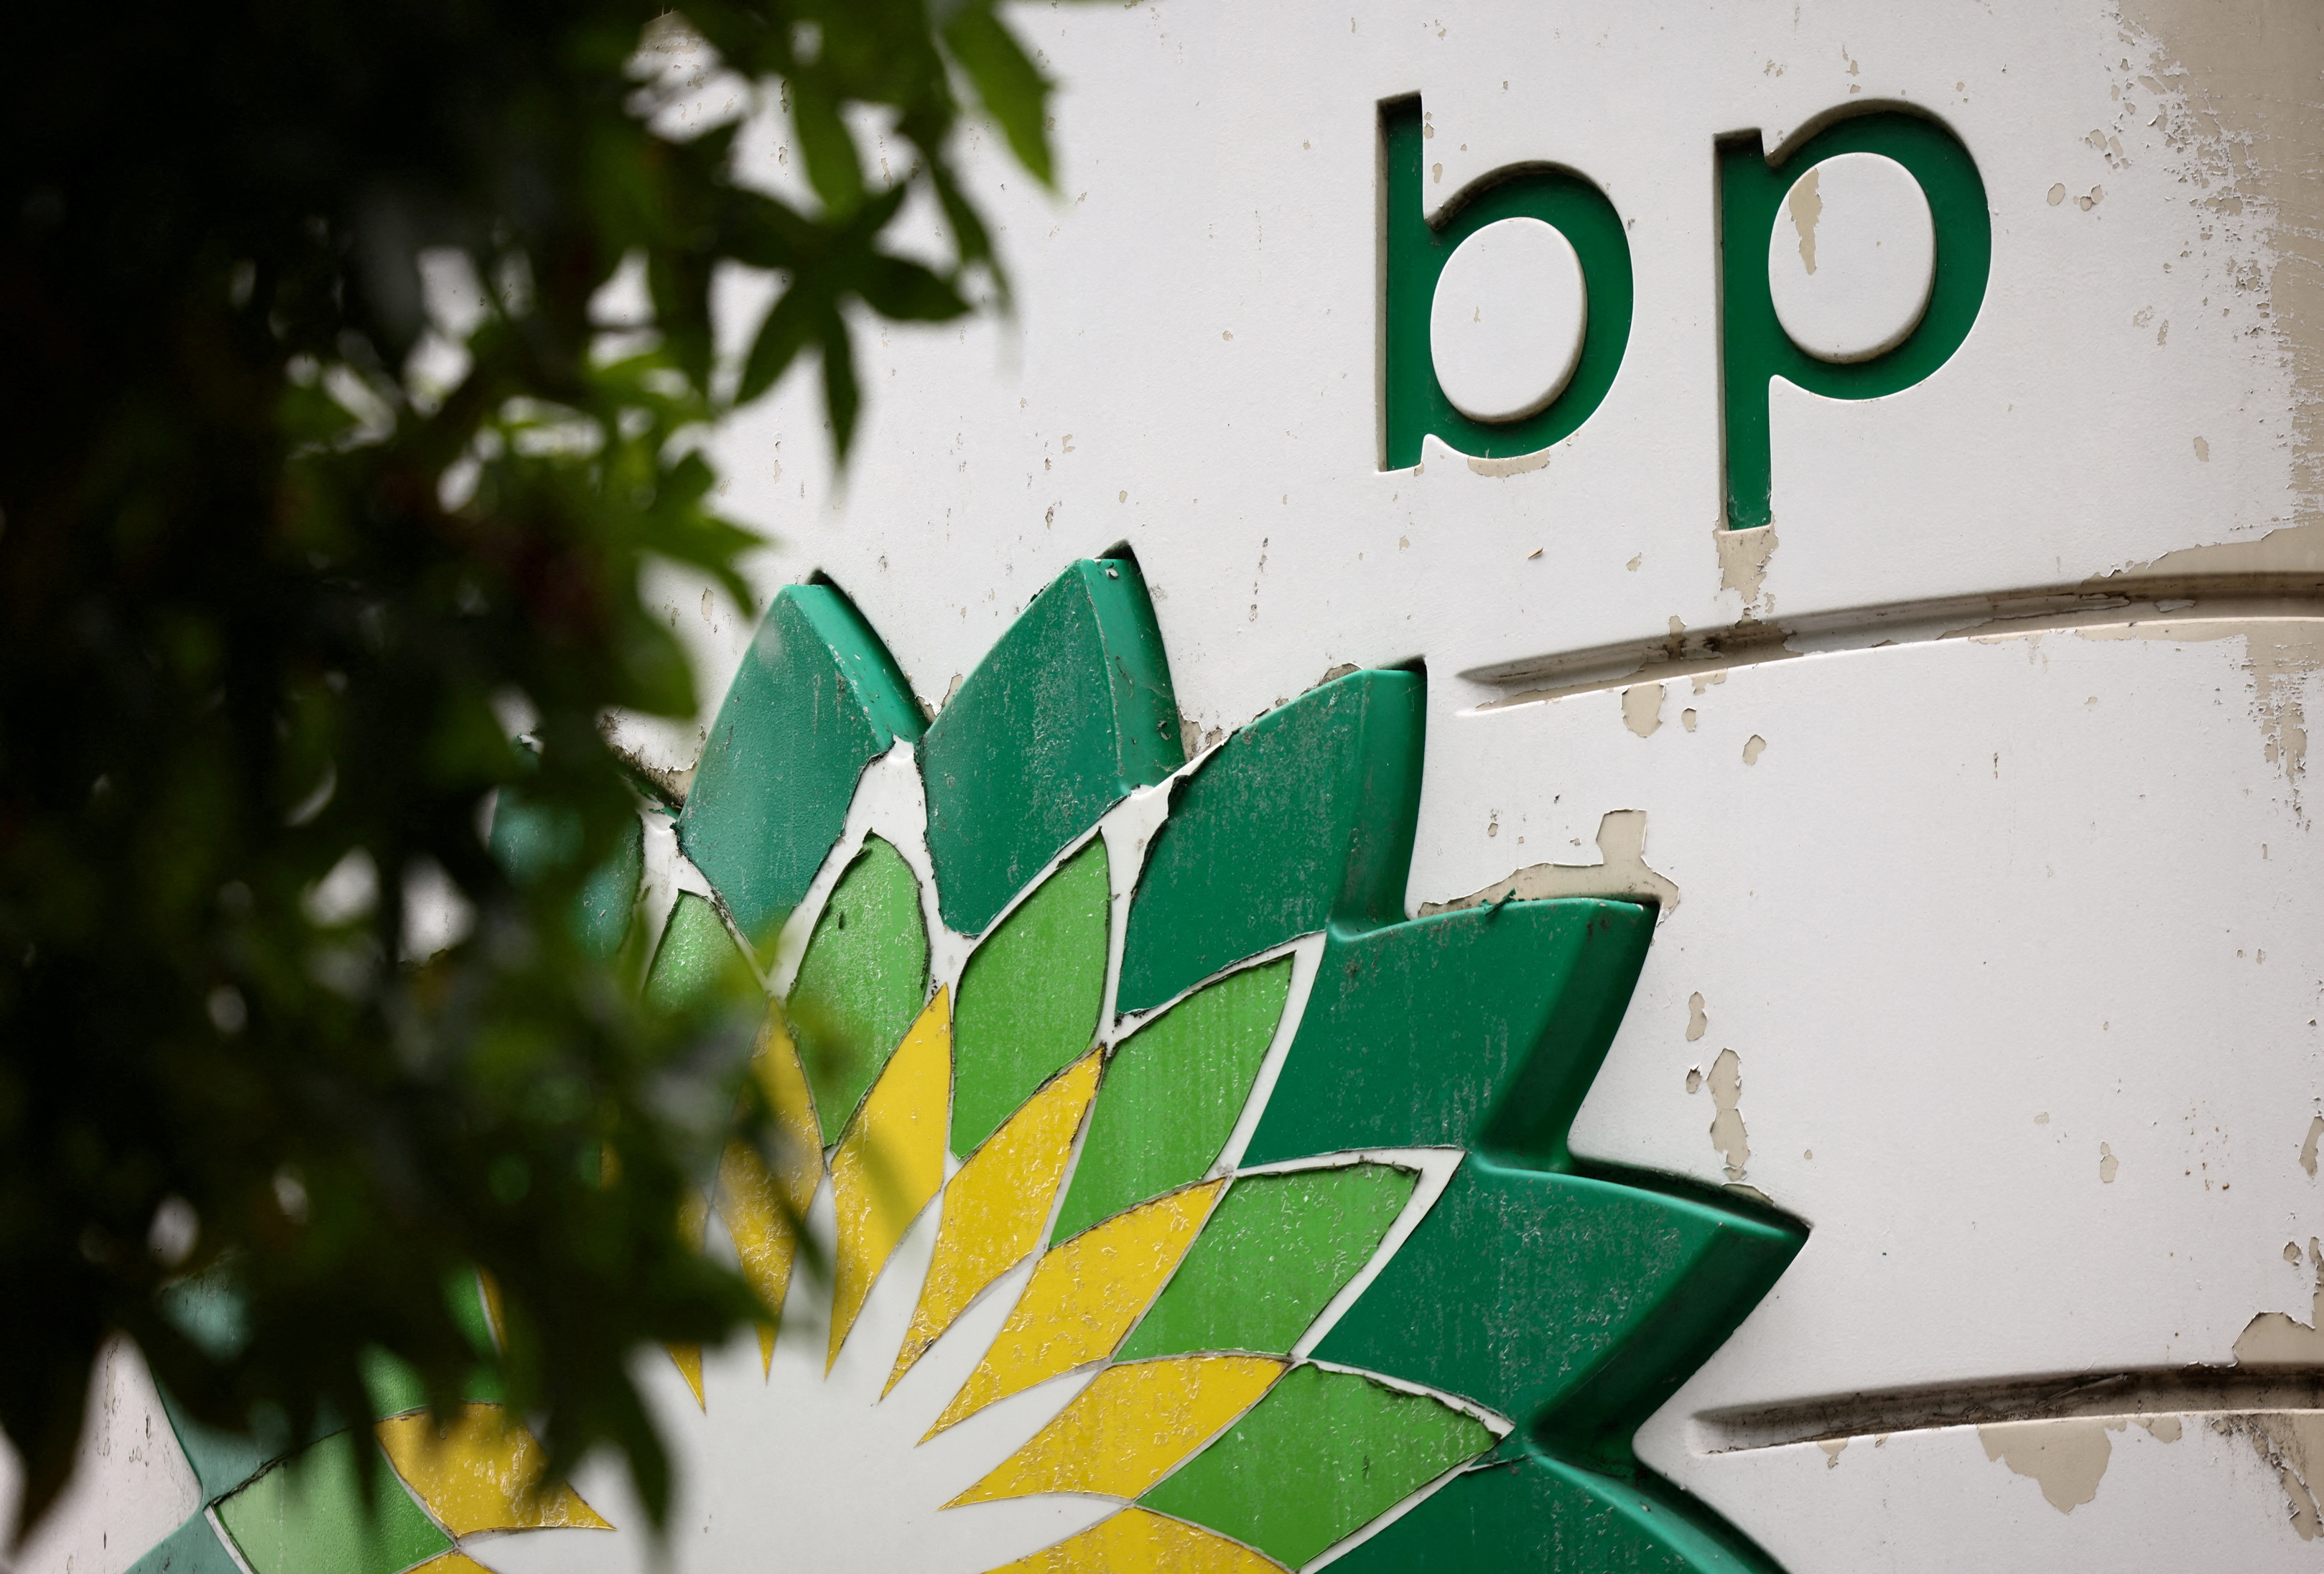 Mauritania And BP To Explore Green Hydrogen Projects